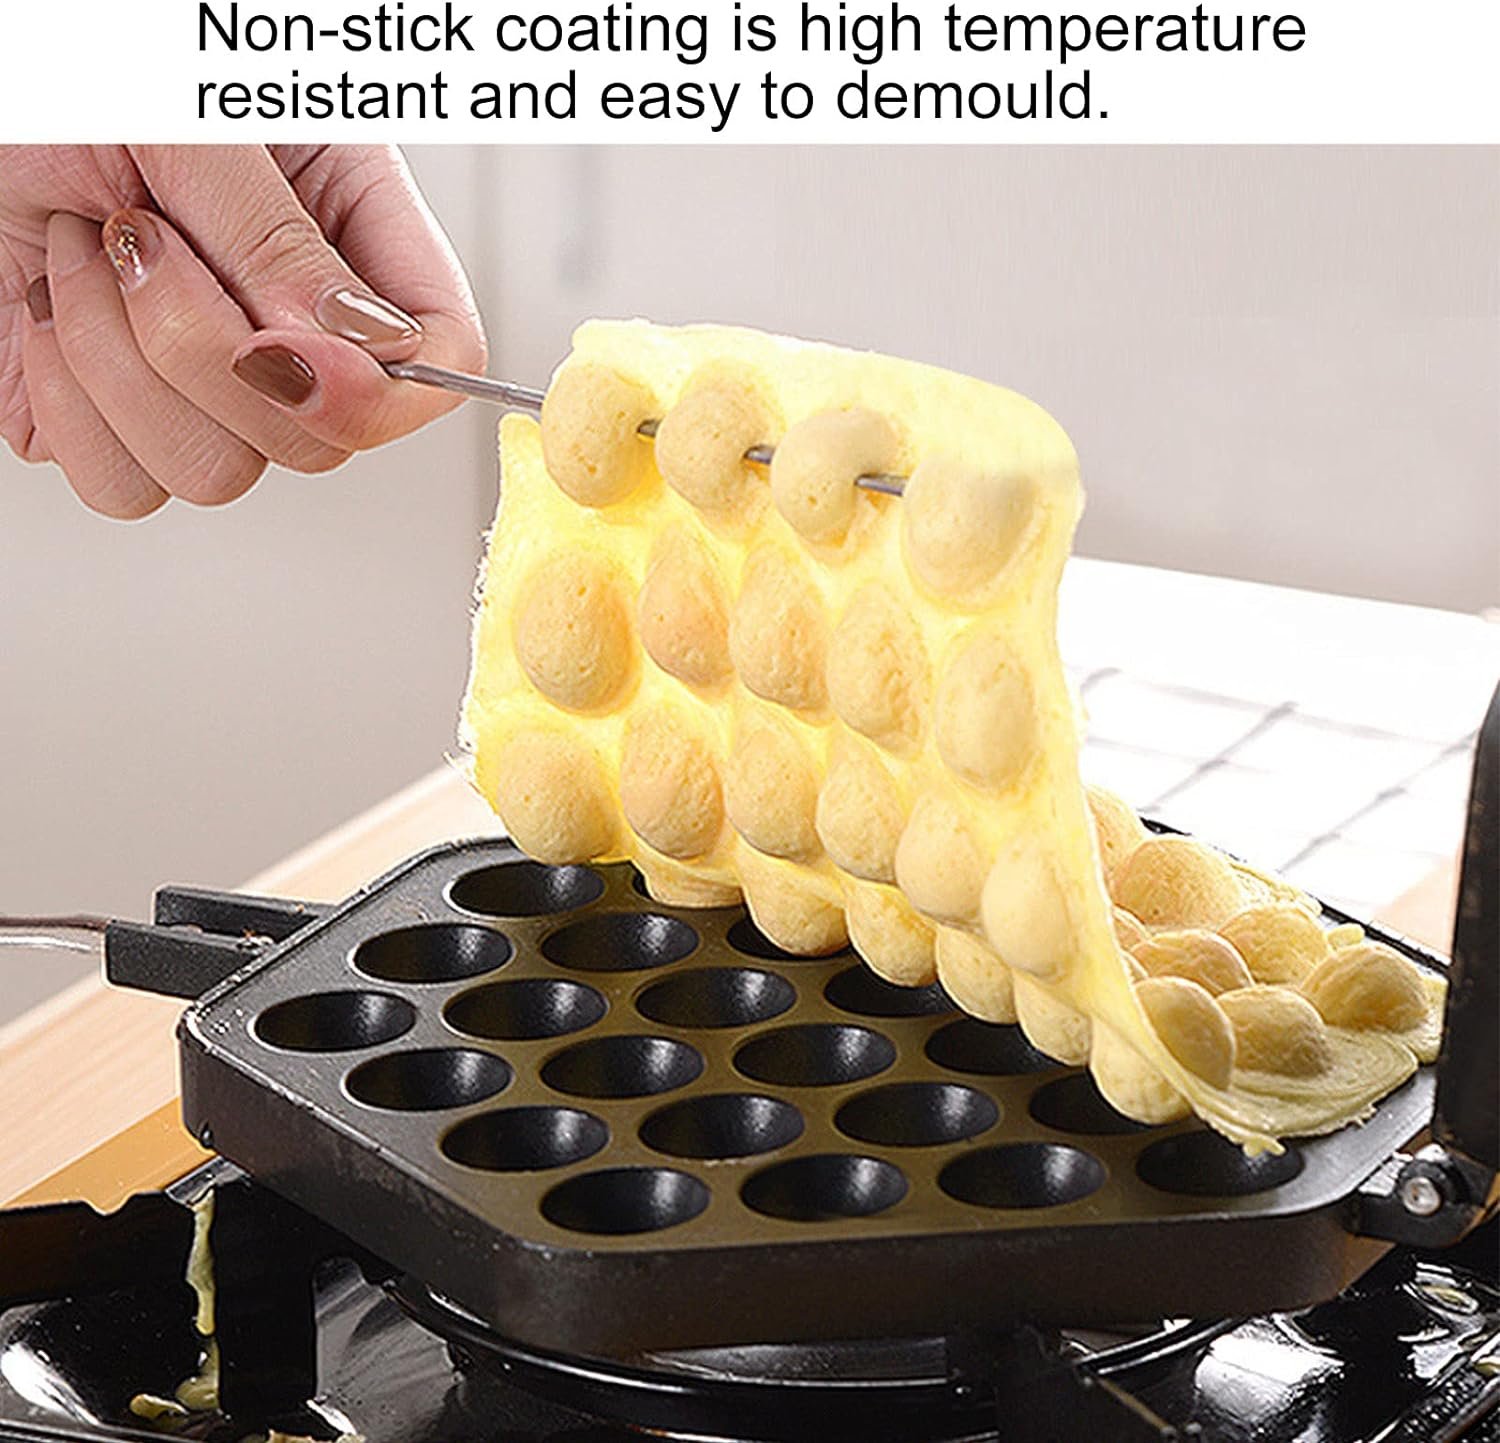 30-Hole Egg Puff Maker Non-Stick Aluminium Alloy Egg Puff Mold Pan for Home Kitchen Use，high temperature resistant and easy to demould